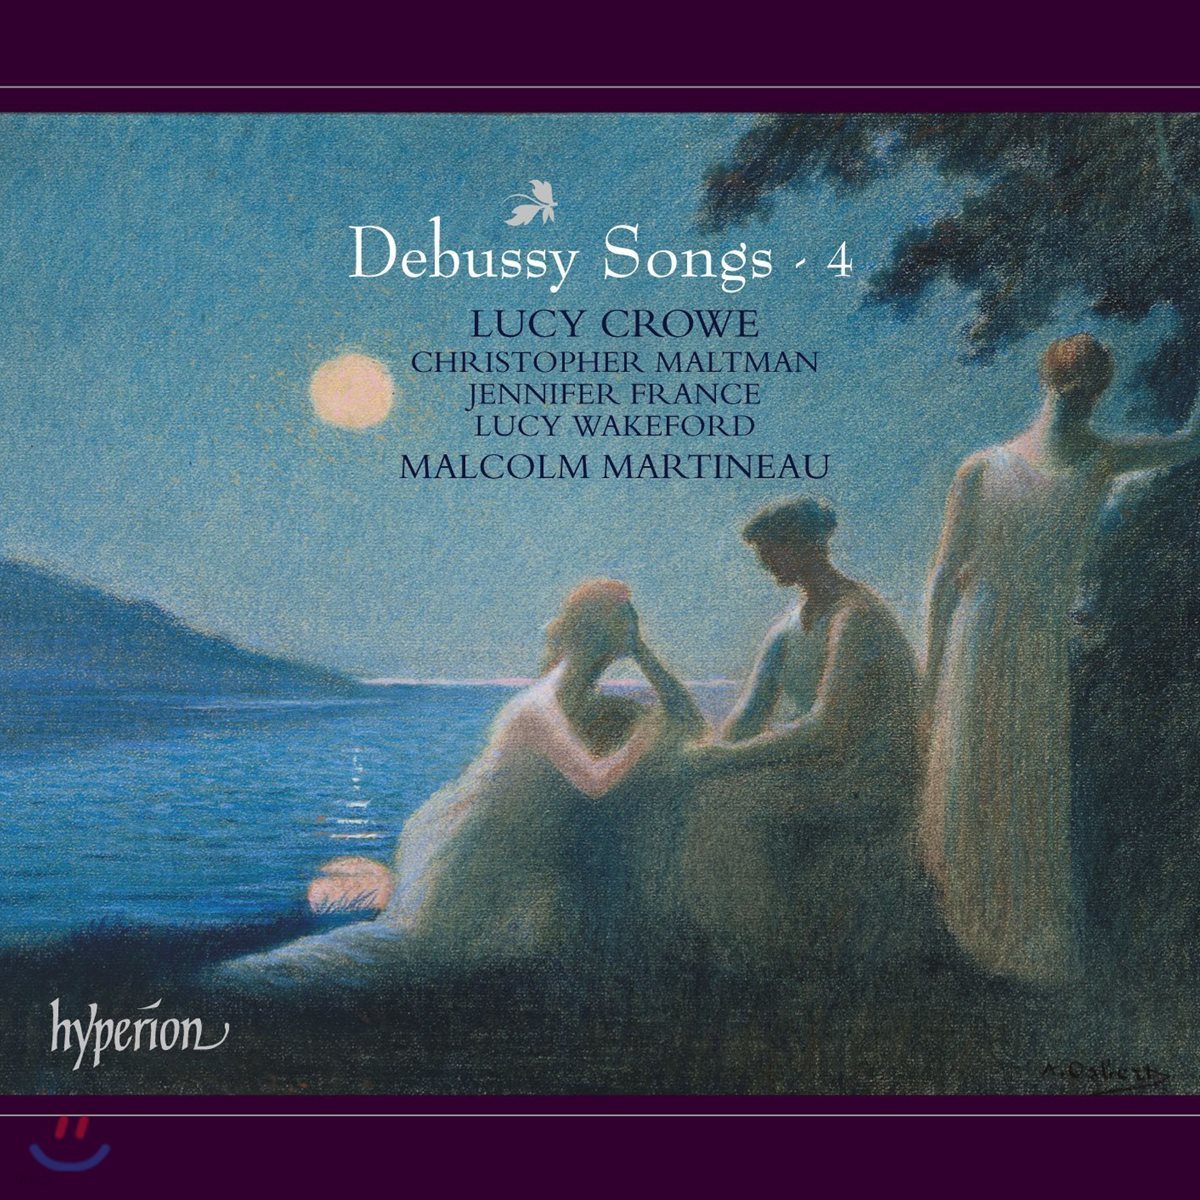 Lucy Crowe 드뷔시: 가곡집 4권 (Debussy: Songs Vol.4)